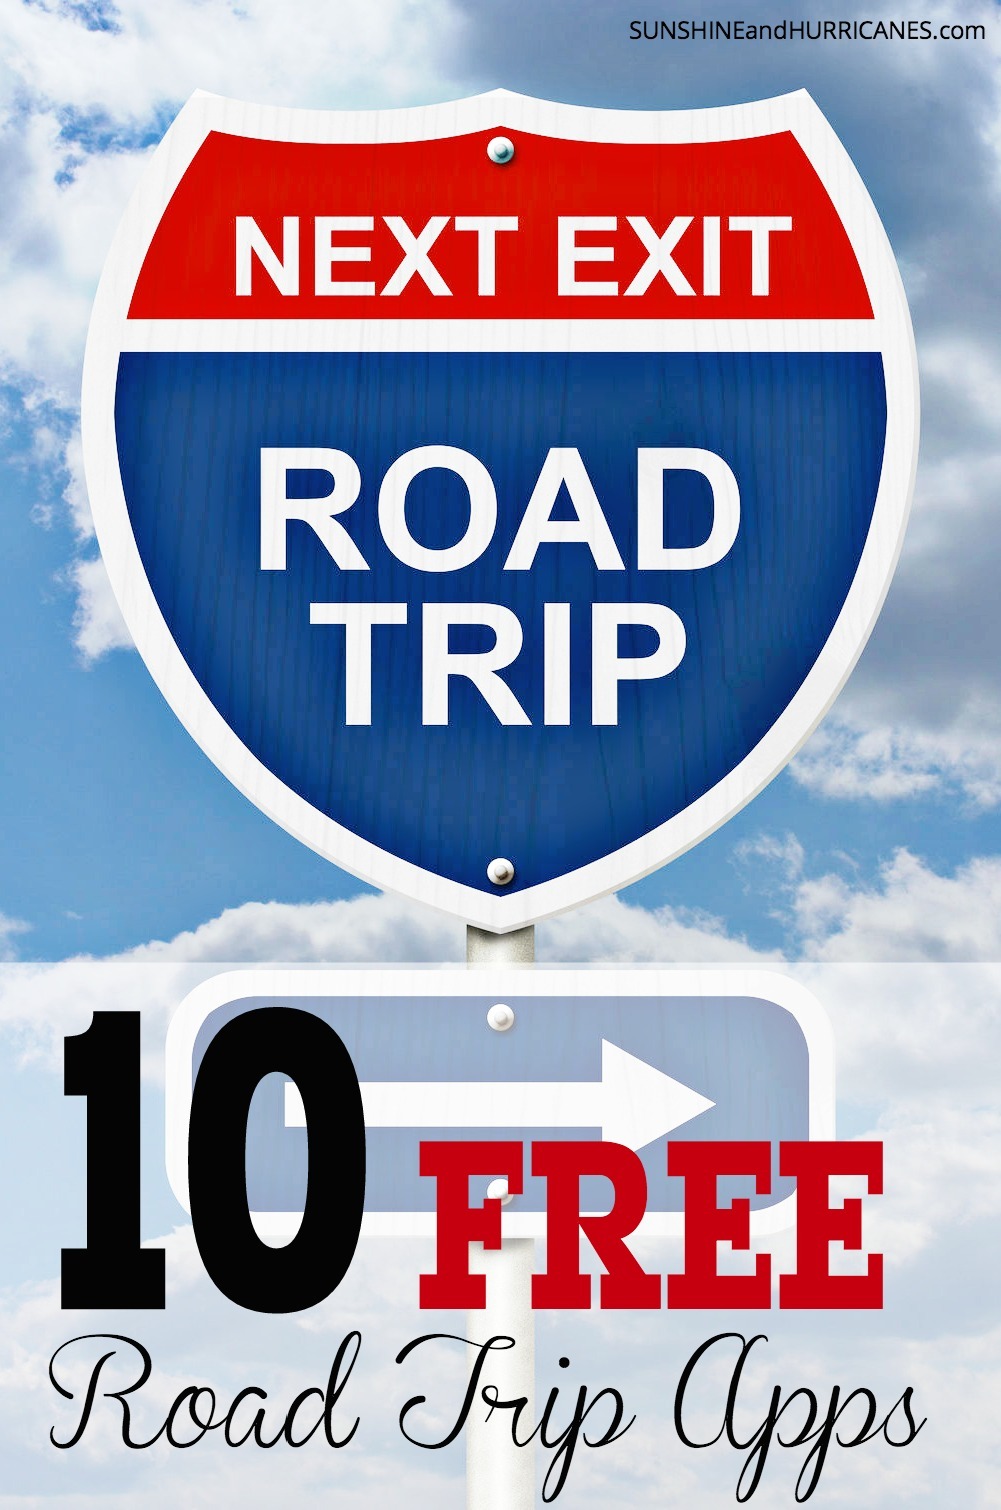 Looking to get away this summer by taking a family road trip? These days, technology has made this time honored tradition a much easier adventure with information, education and other travel resources right at your fingertips. Have fun, save money and know all the best insider tips and tricks for road travel with these 10 FREE road trip apps. SunshineandHurricanes.com